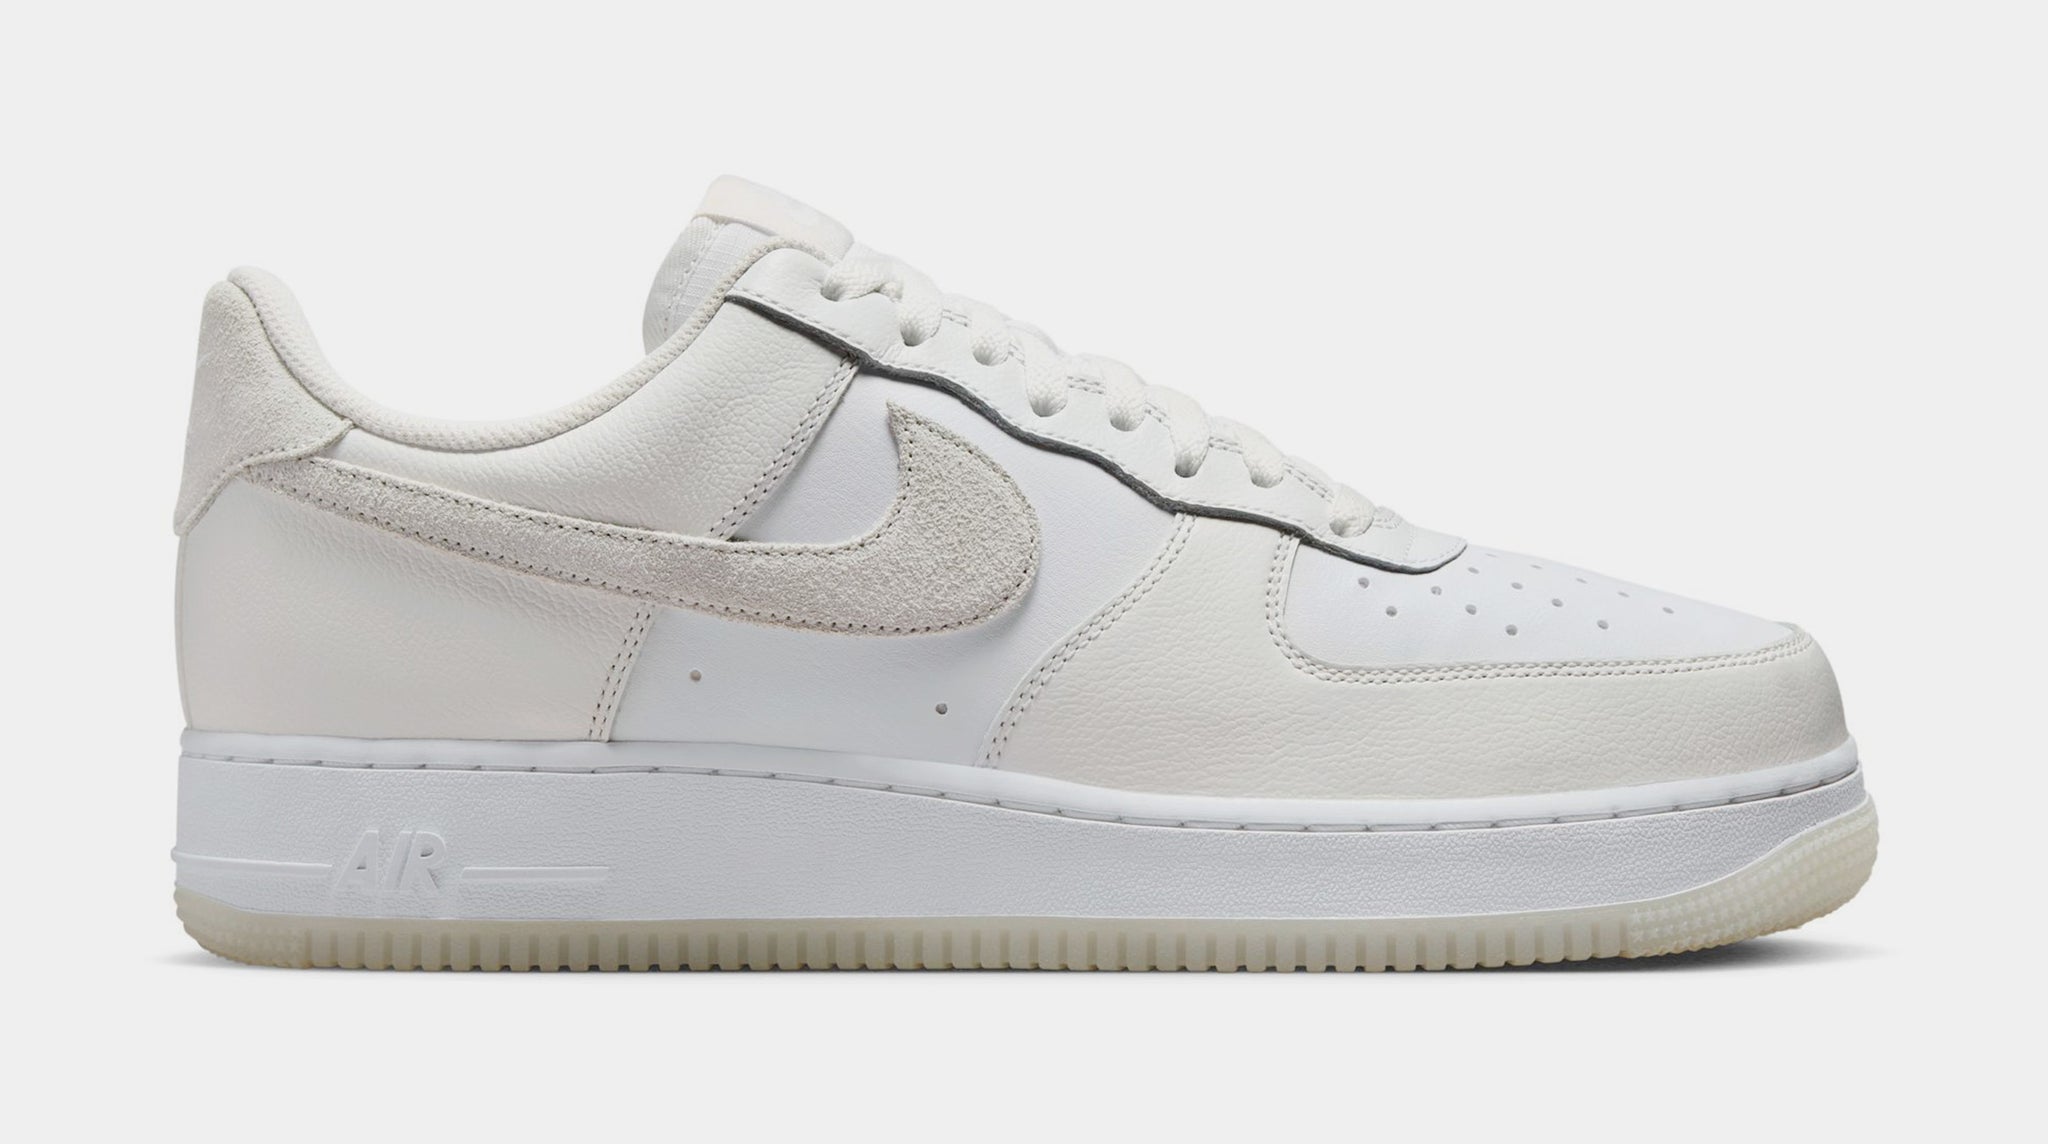 Nike Air Force 1 '07 LV8 Mens Lifestyle Shoes White Summit White ...